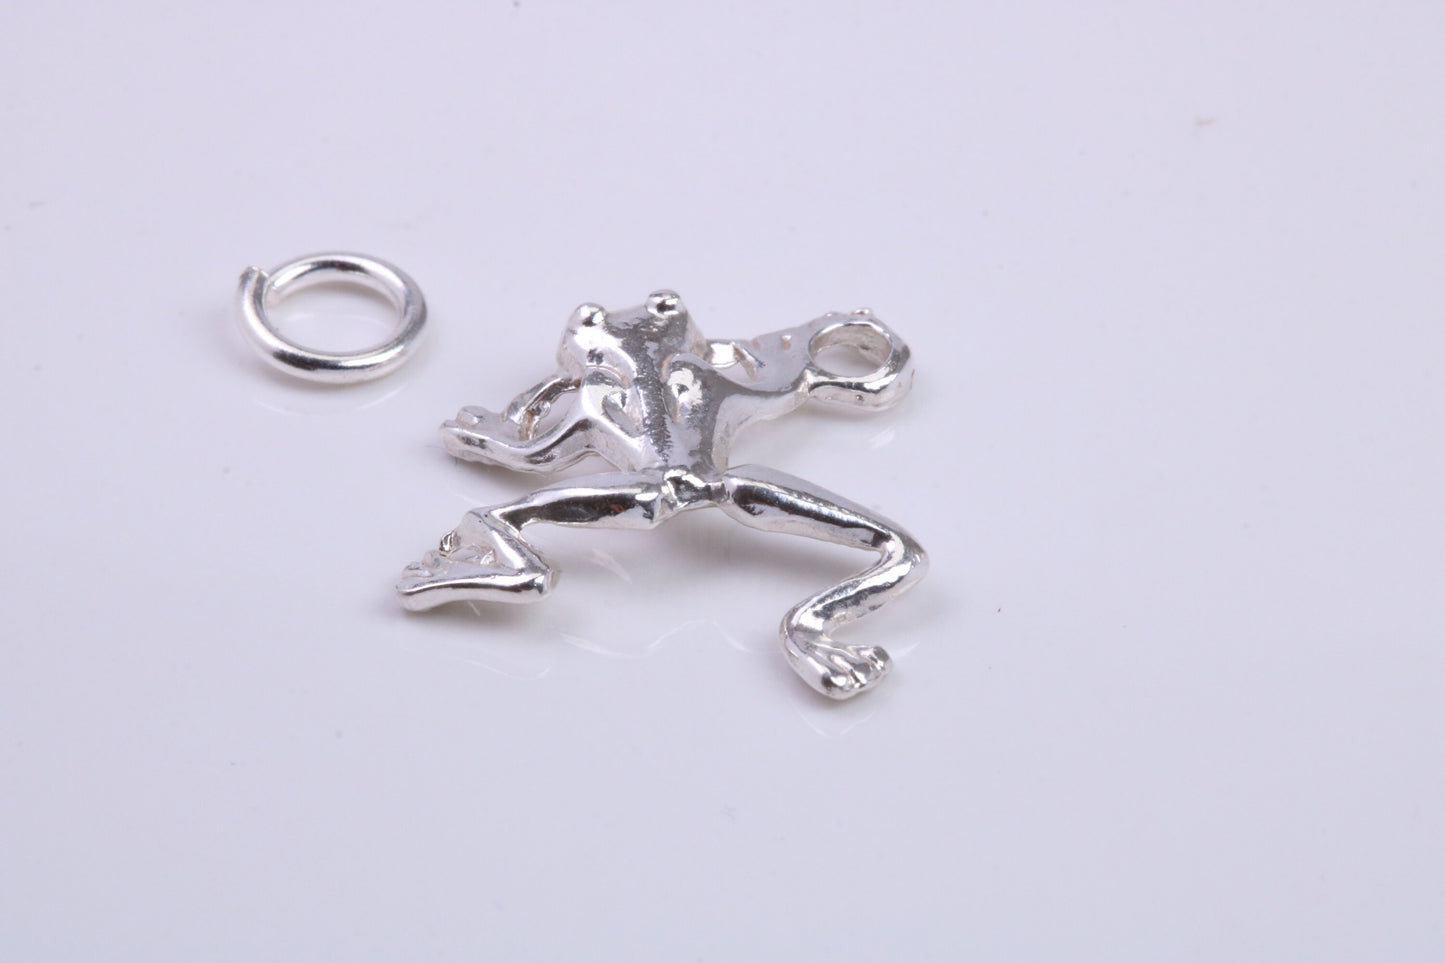 Frog Charm, Traditional Charm, Made from Solid 925 Grade Sterling Silver, Complete with Attachment Link